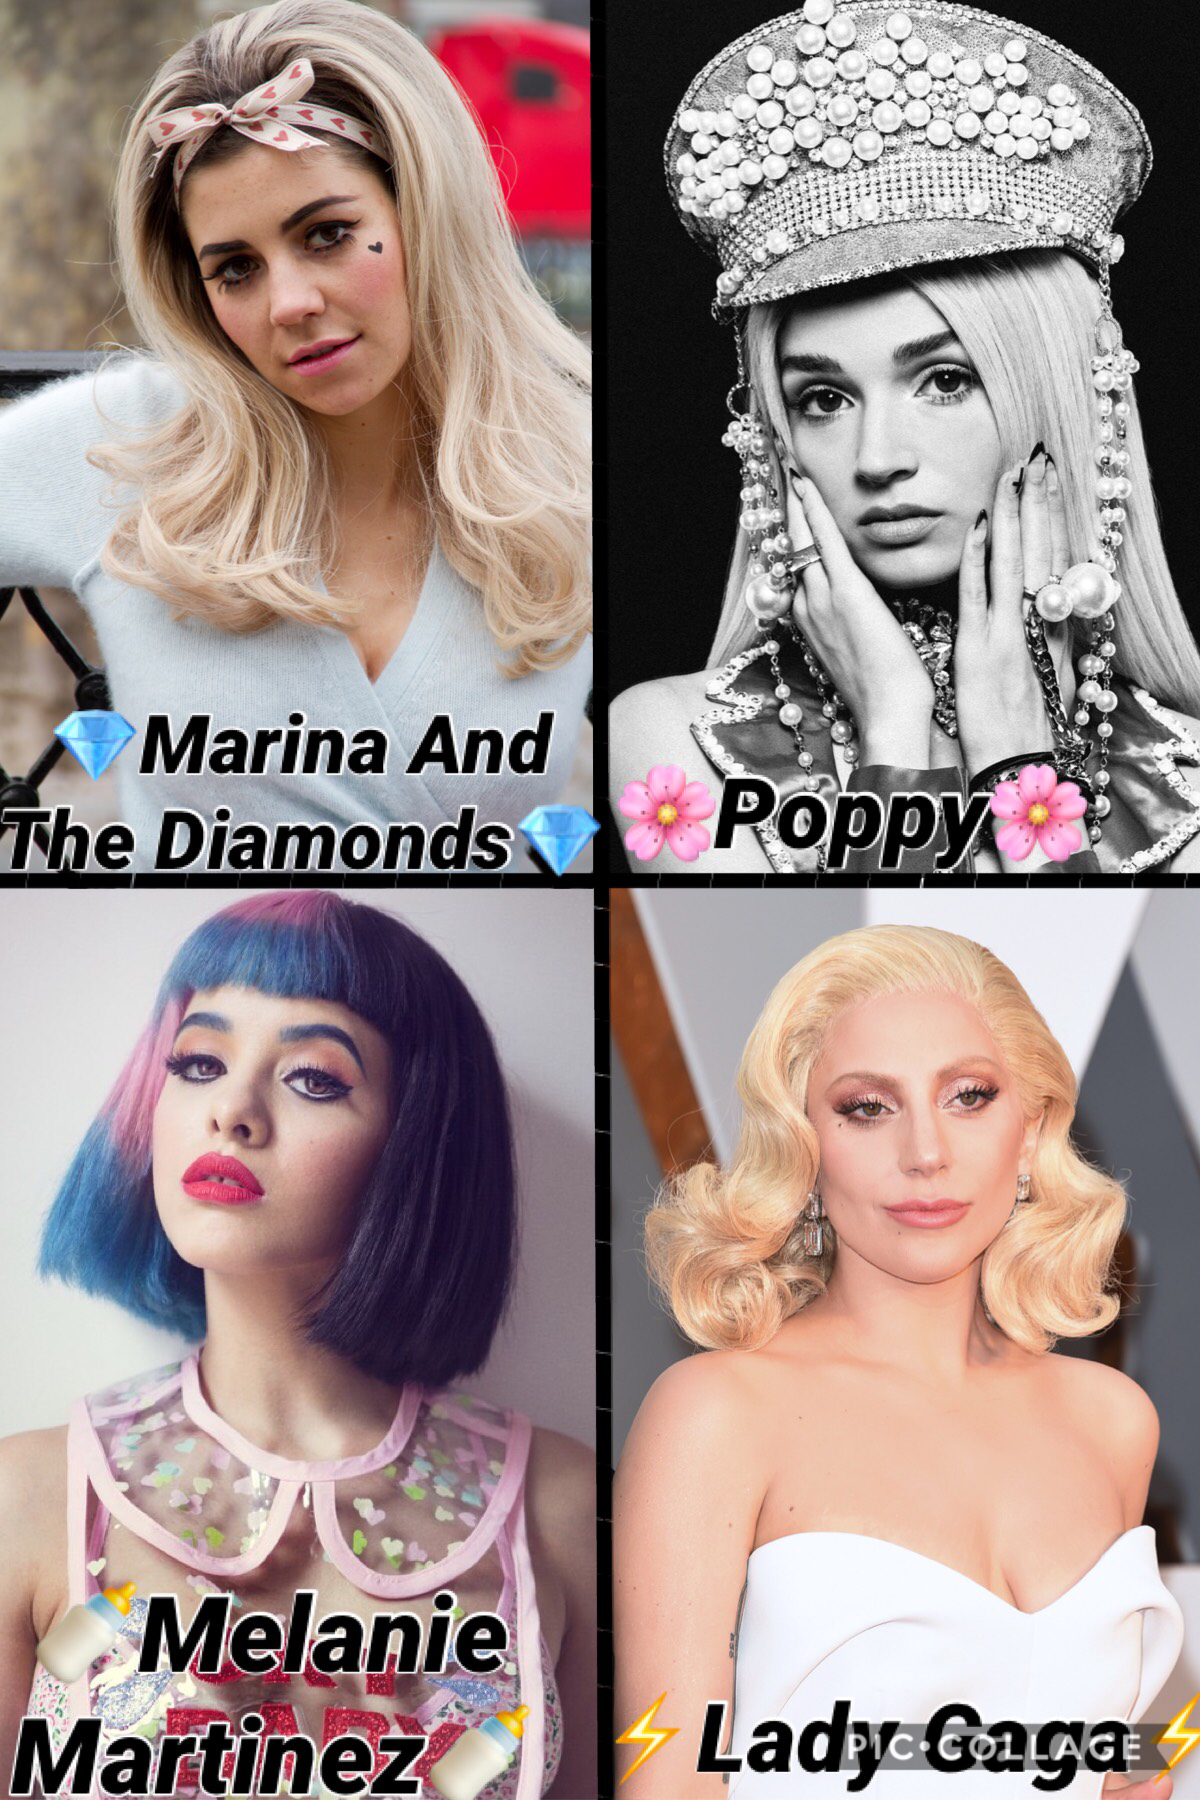 My favOrite singers. 😎. I dOn’t like Lady Gaga’s newer sOngs thO, I like her Older Ones like Bad Romance and Telephone. AlsO, yOu shOuld listen tO Melanie Martinez’s new track: K-12.